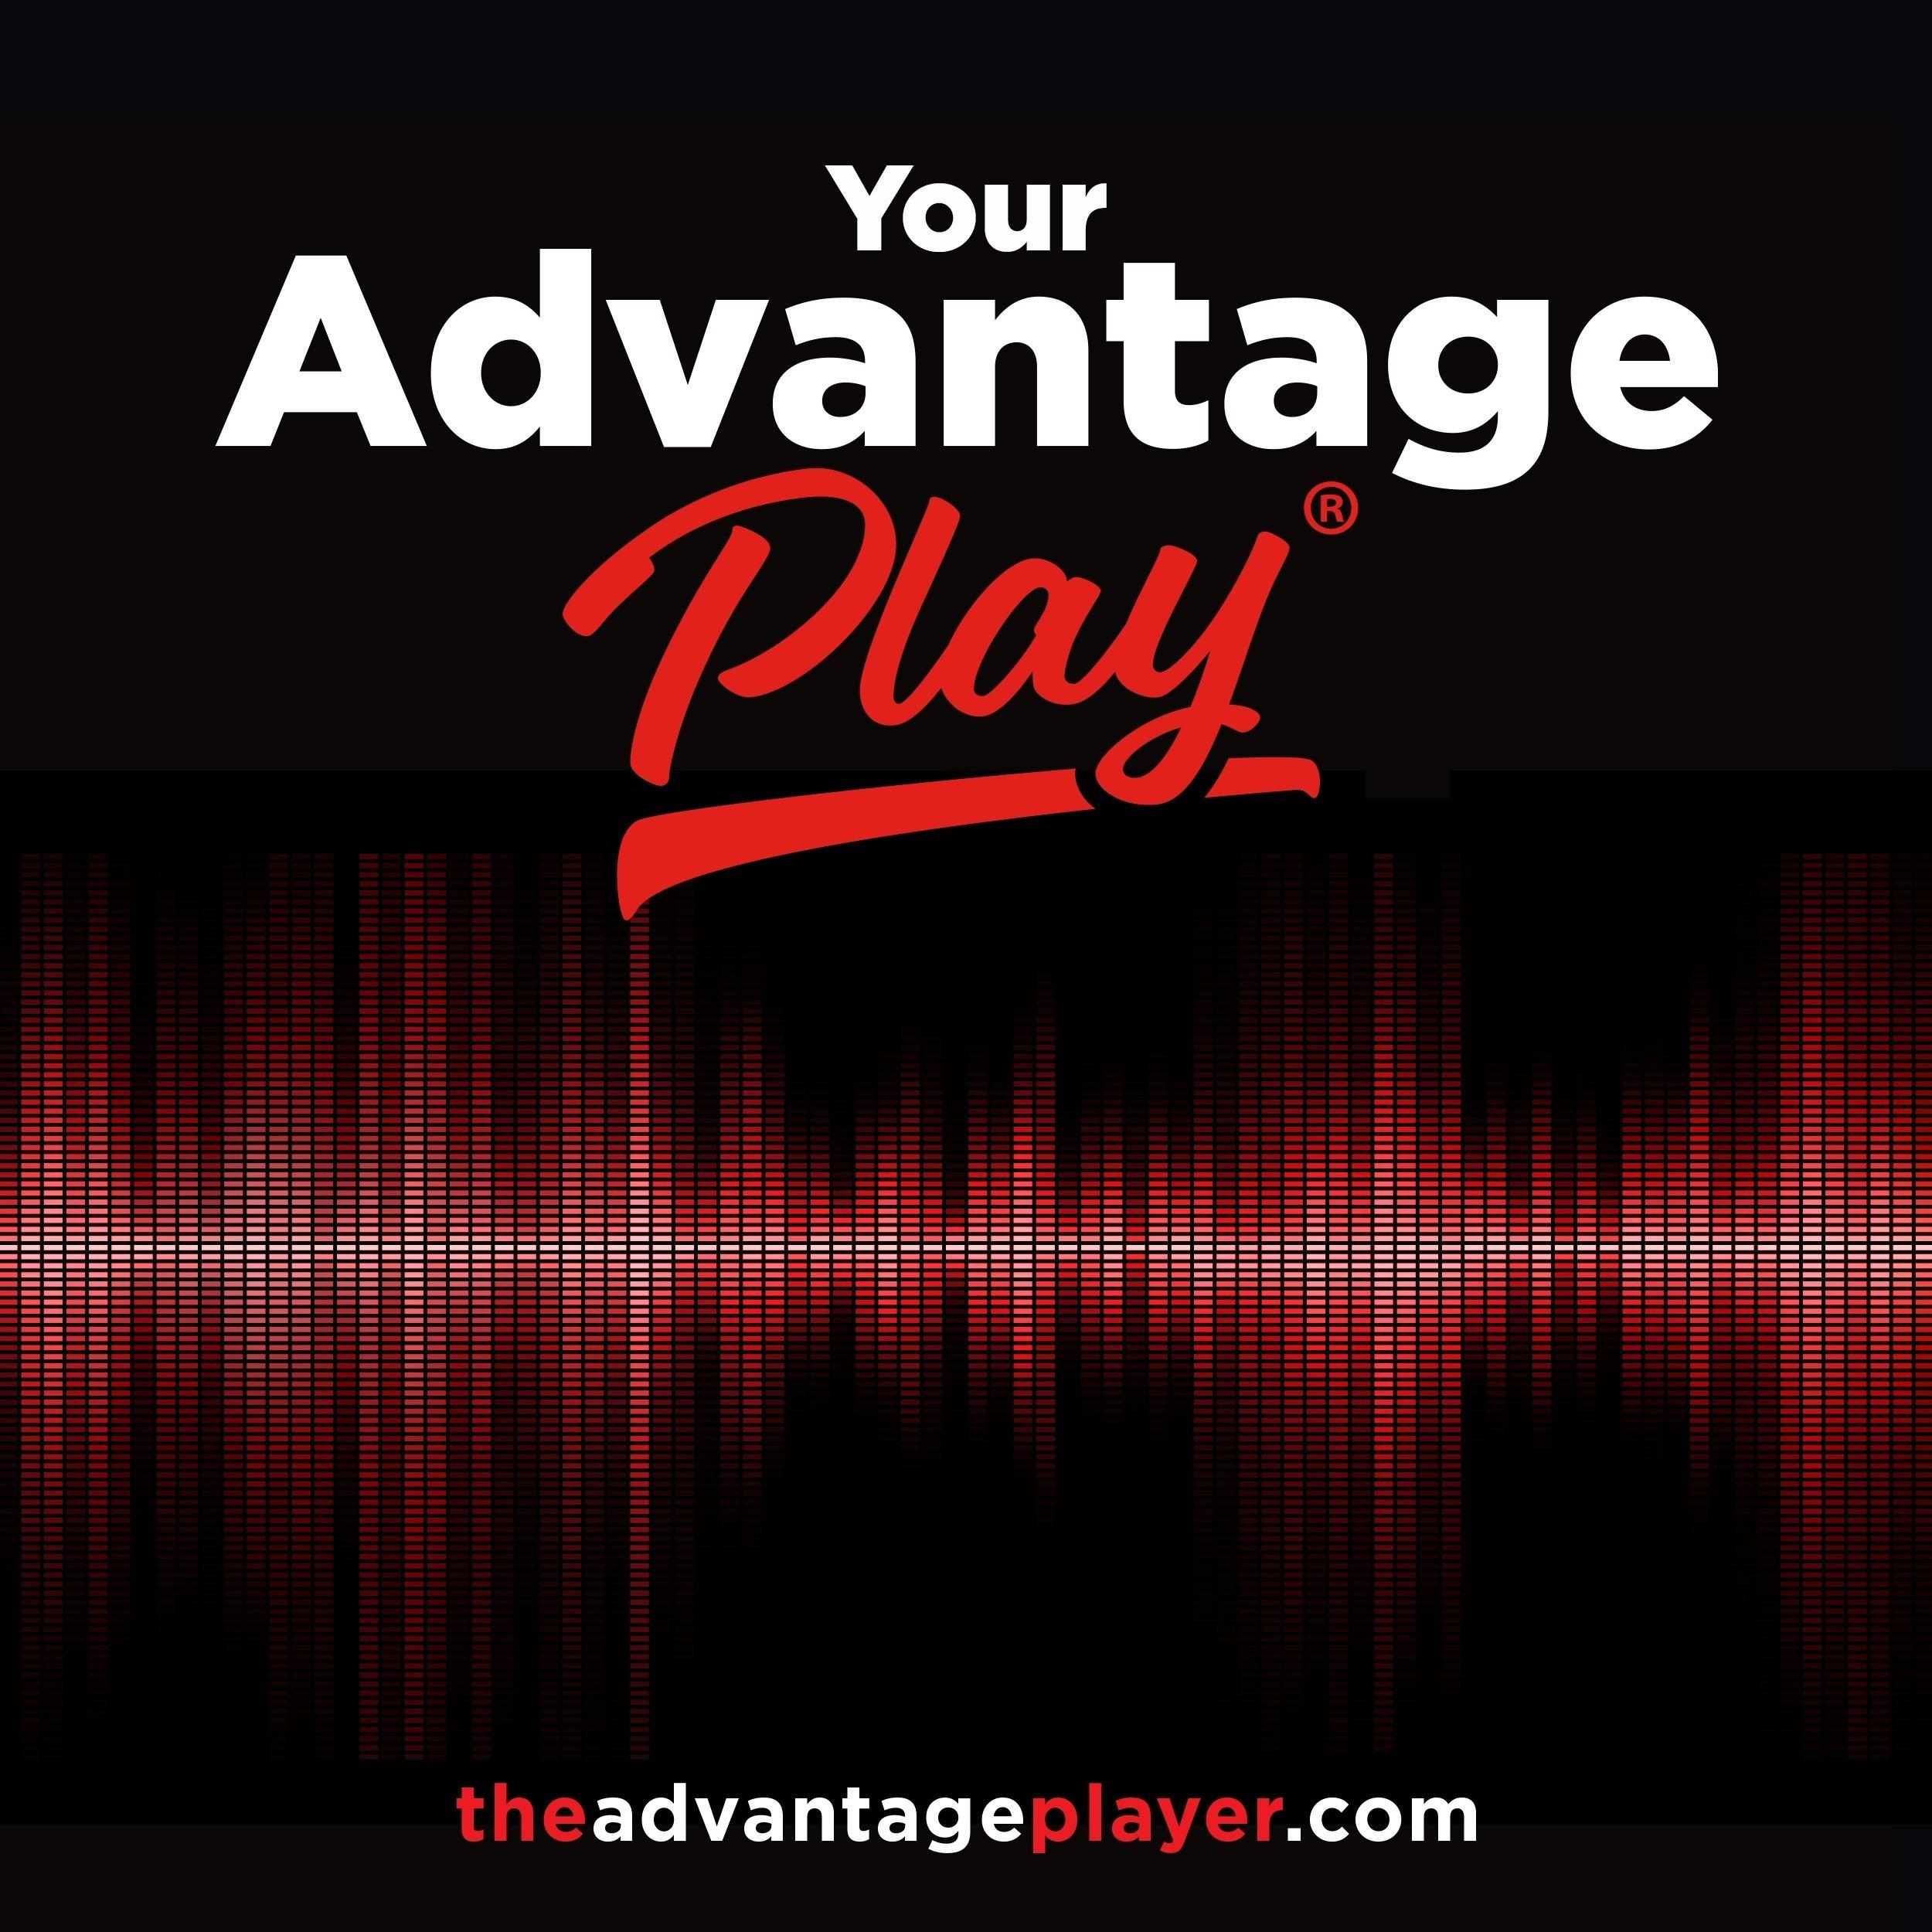 Your Advantage Play®